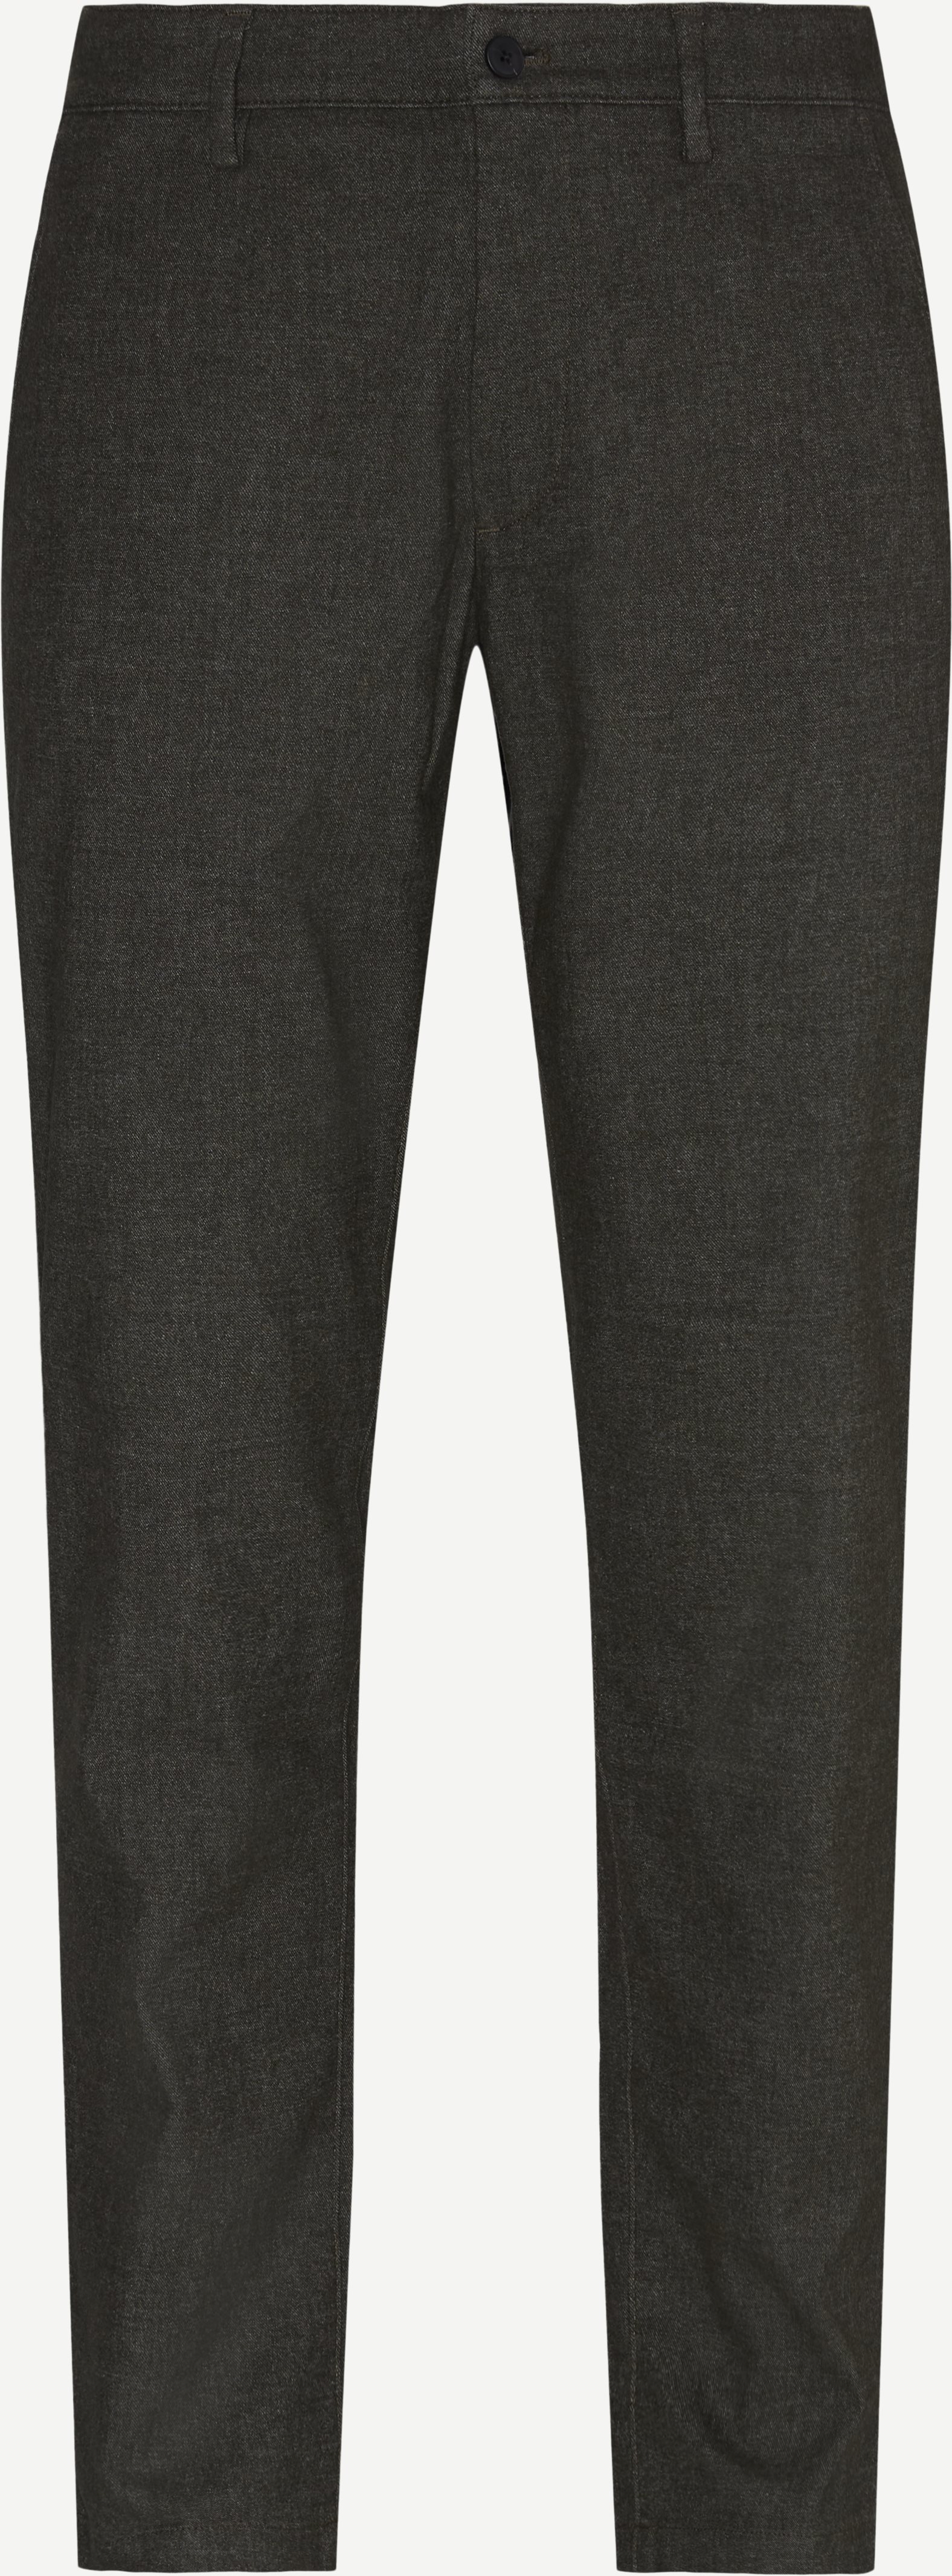 Karl Chino - Trousers - Regular fit - Army